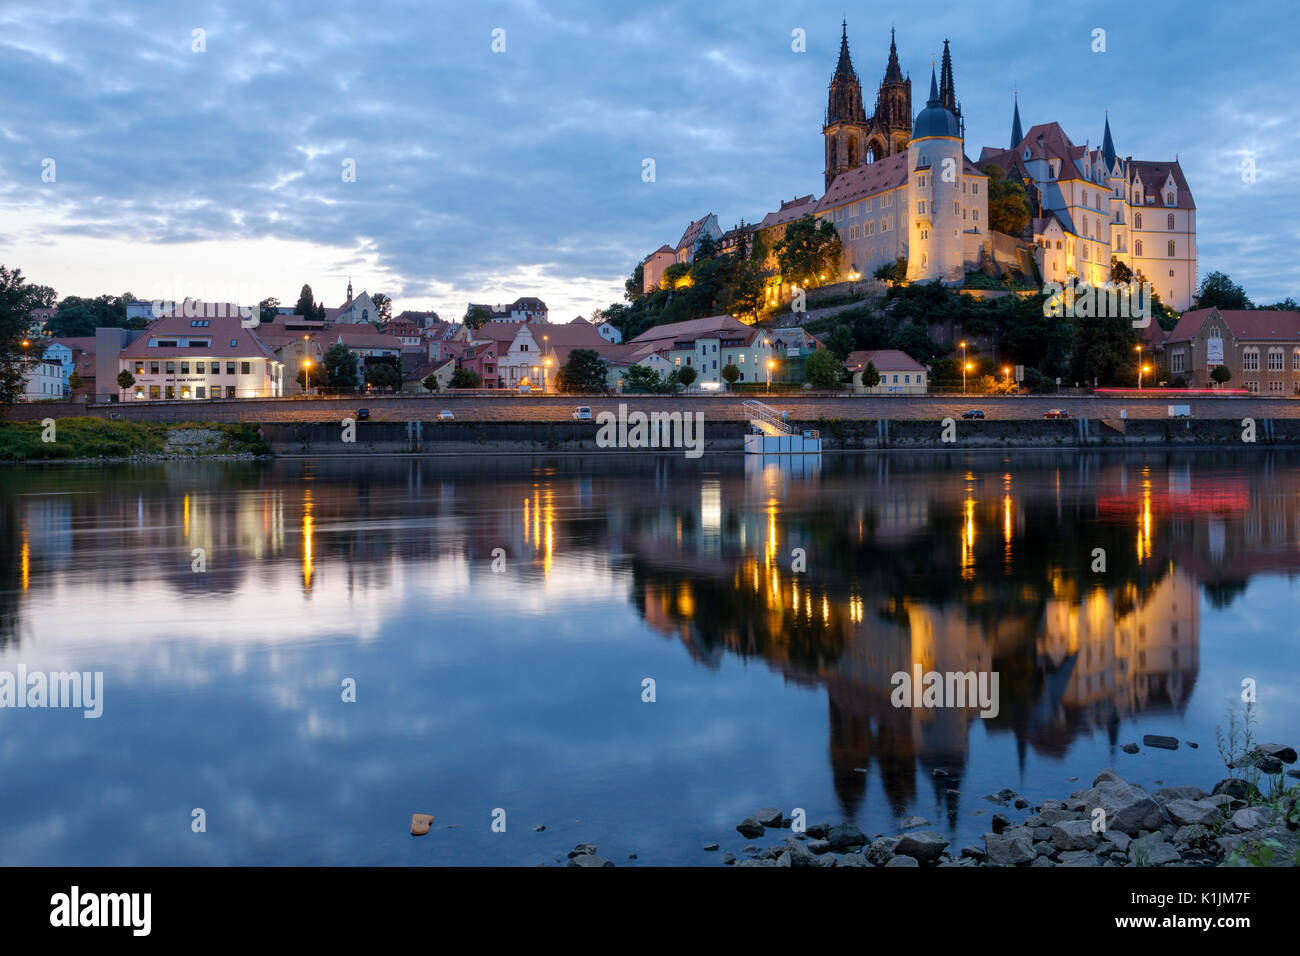 view over the Altstadt with the Albrechtsburg and River Elbe, Meissen, Saxony, Germany Stock Photo